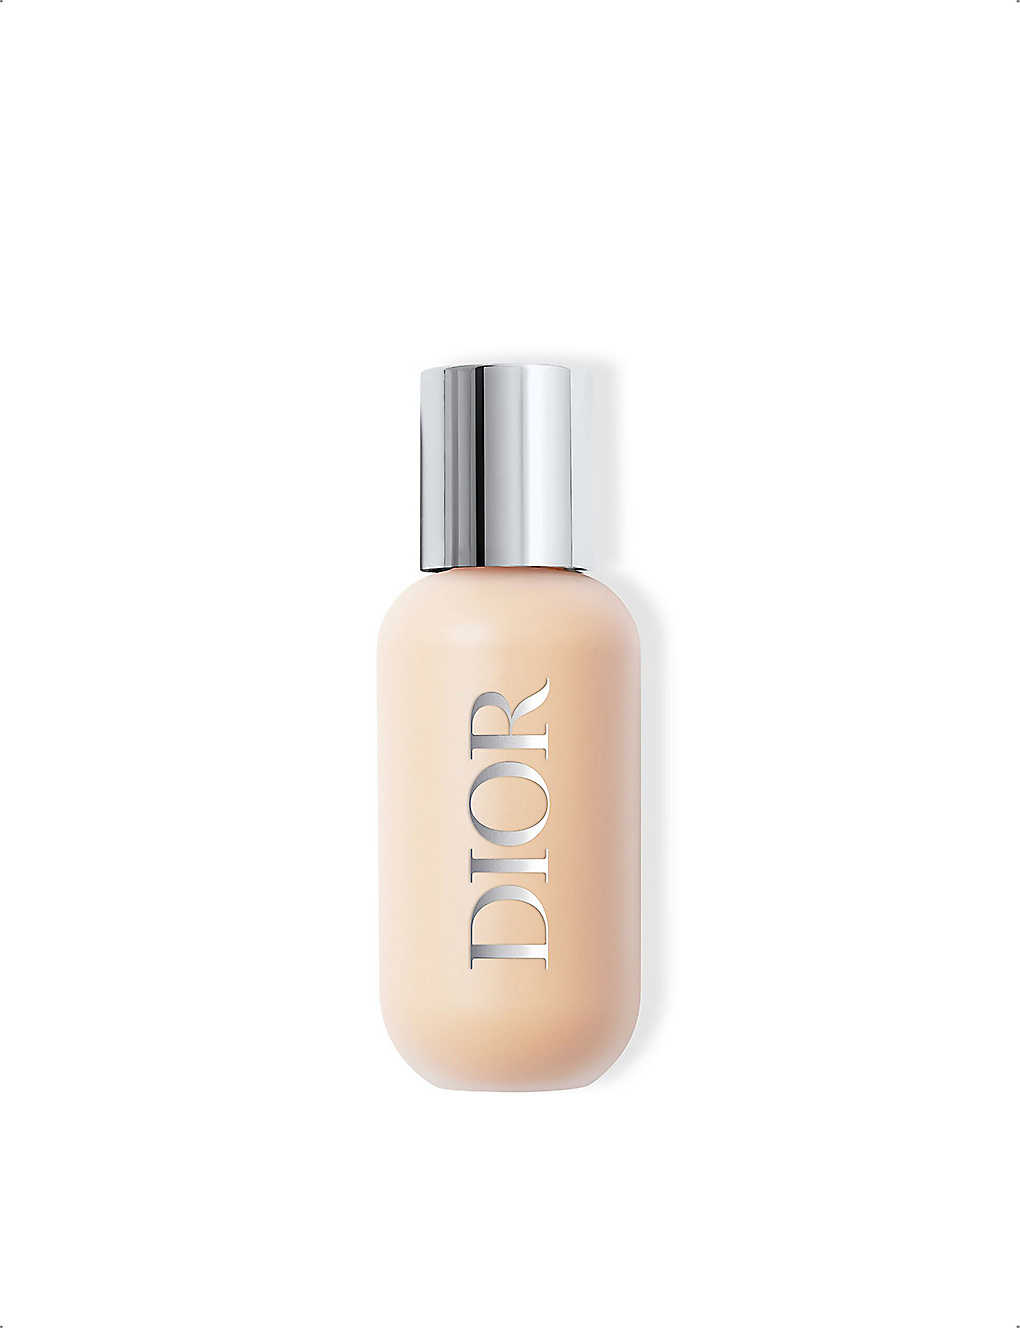 Dior Backstage Face & Body Foundation 50ml In 1n